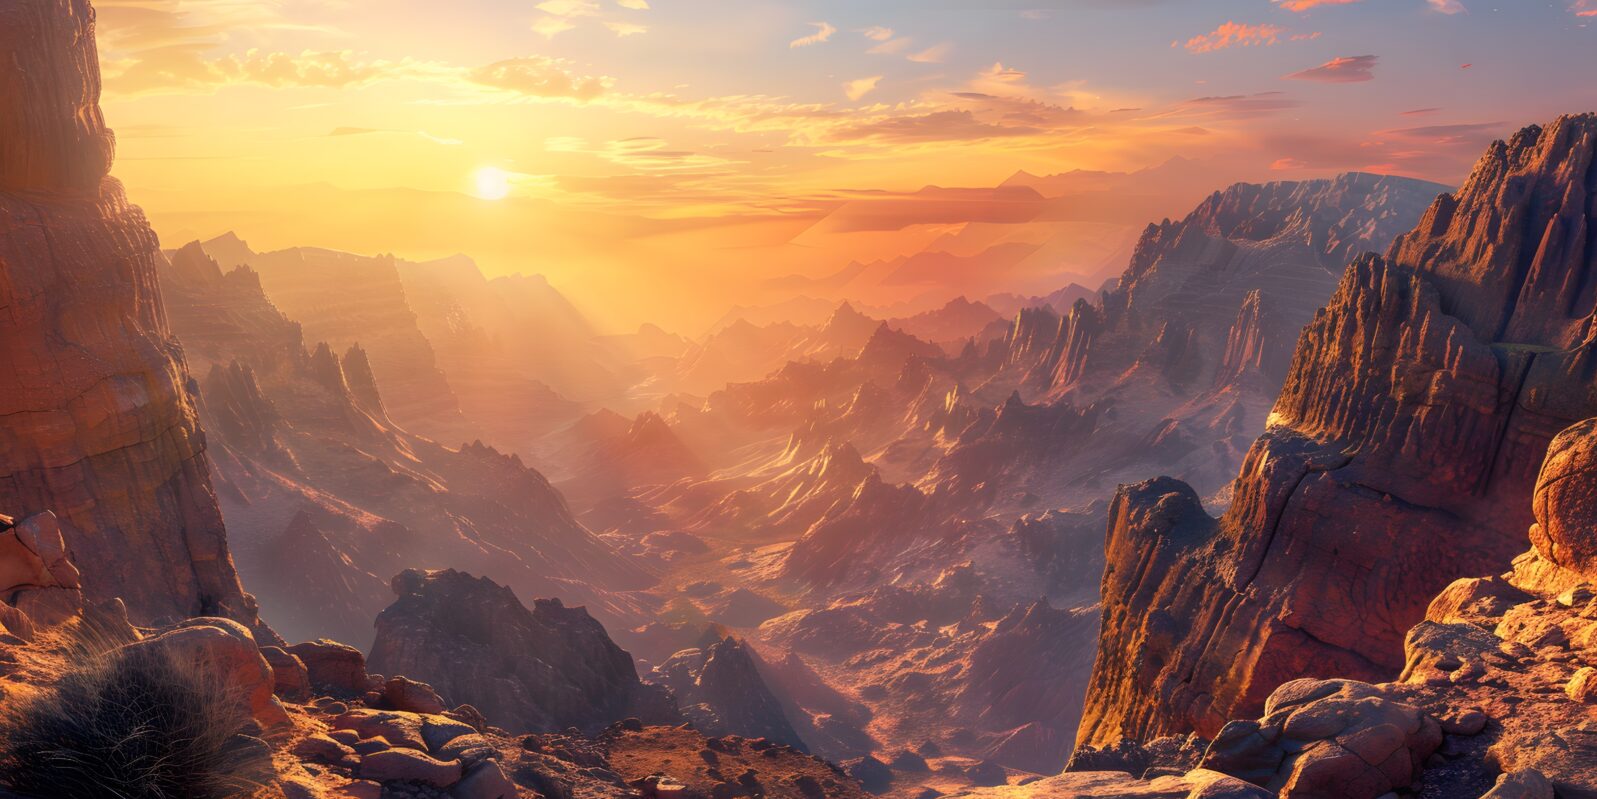 Capture the realism of a breathtaking sunrise, casting its warm glow over a majestic mountain landscape.